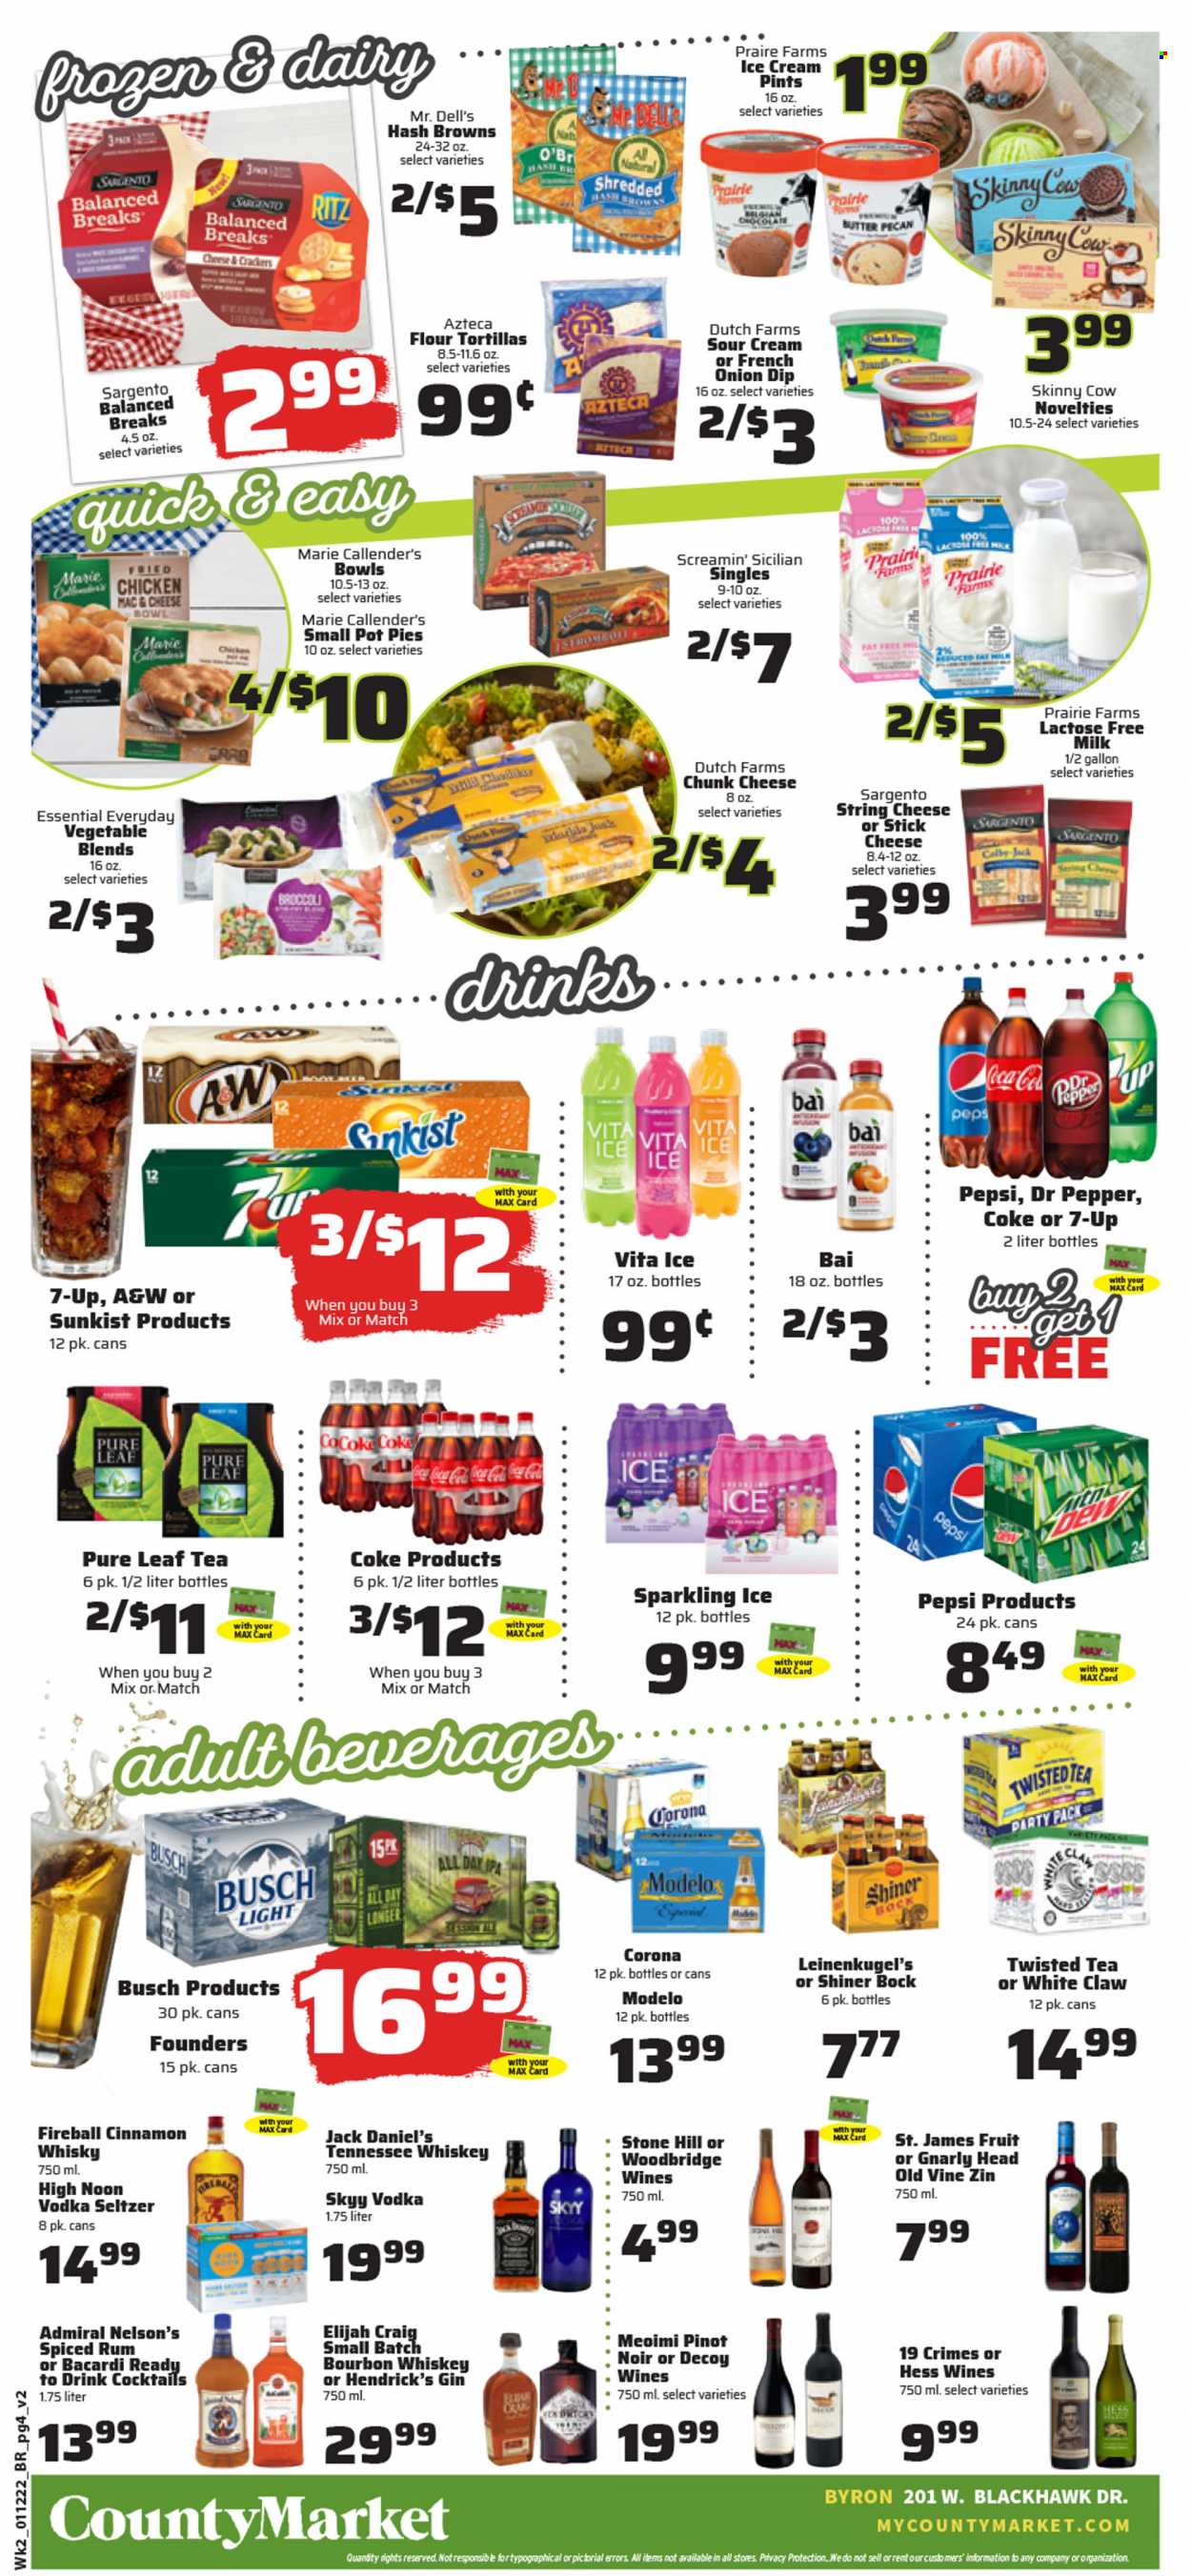 thumbnail - County Market Flyer - 01/12/2022 - 01/18/2022 - Sales products - tortillas, flour tortillas, pot pie, broccoli, Jack Daniel's, Marie Callender's, string cheese, chunk cheese, Sargento, milk, lactose free milk, butter, sour cream, dip, ice cream, cheese sticks, hash browns, Screamin' Sicilian, RITZ, cinnamon, Coca-Cola, Pepsi, Dr. Pepper, 7UP, Bai, tea, Pure Leaf, red wine, wine, Pinot Noir, Woodbridge, Bacardi, bourbon, gin, rum, spiced rum, Tennessee Whiskey, vodka, whiskey, SKYY, White Claw, Hendrick's, bourbon whiskey, whisky, beer, Busch, Corona Extra, IPA, Modelo, Shiner Bock, Leinenkugel's, Twisted Tea. Page 4.